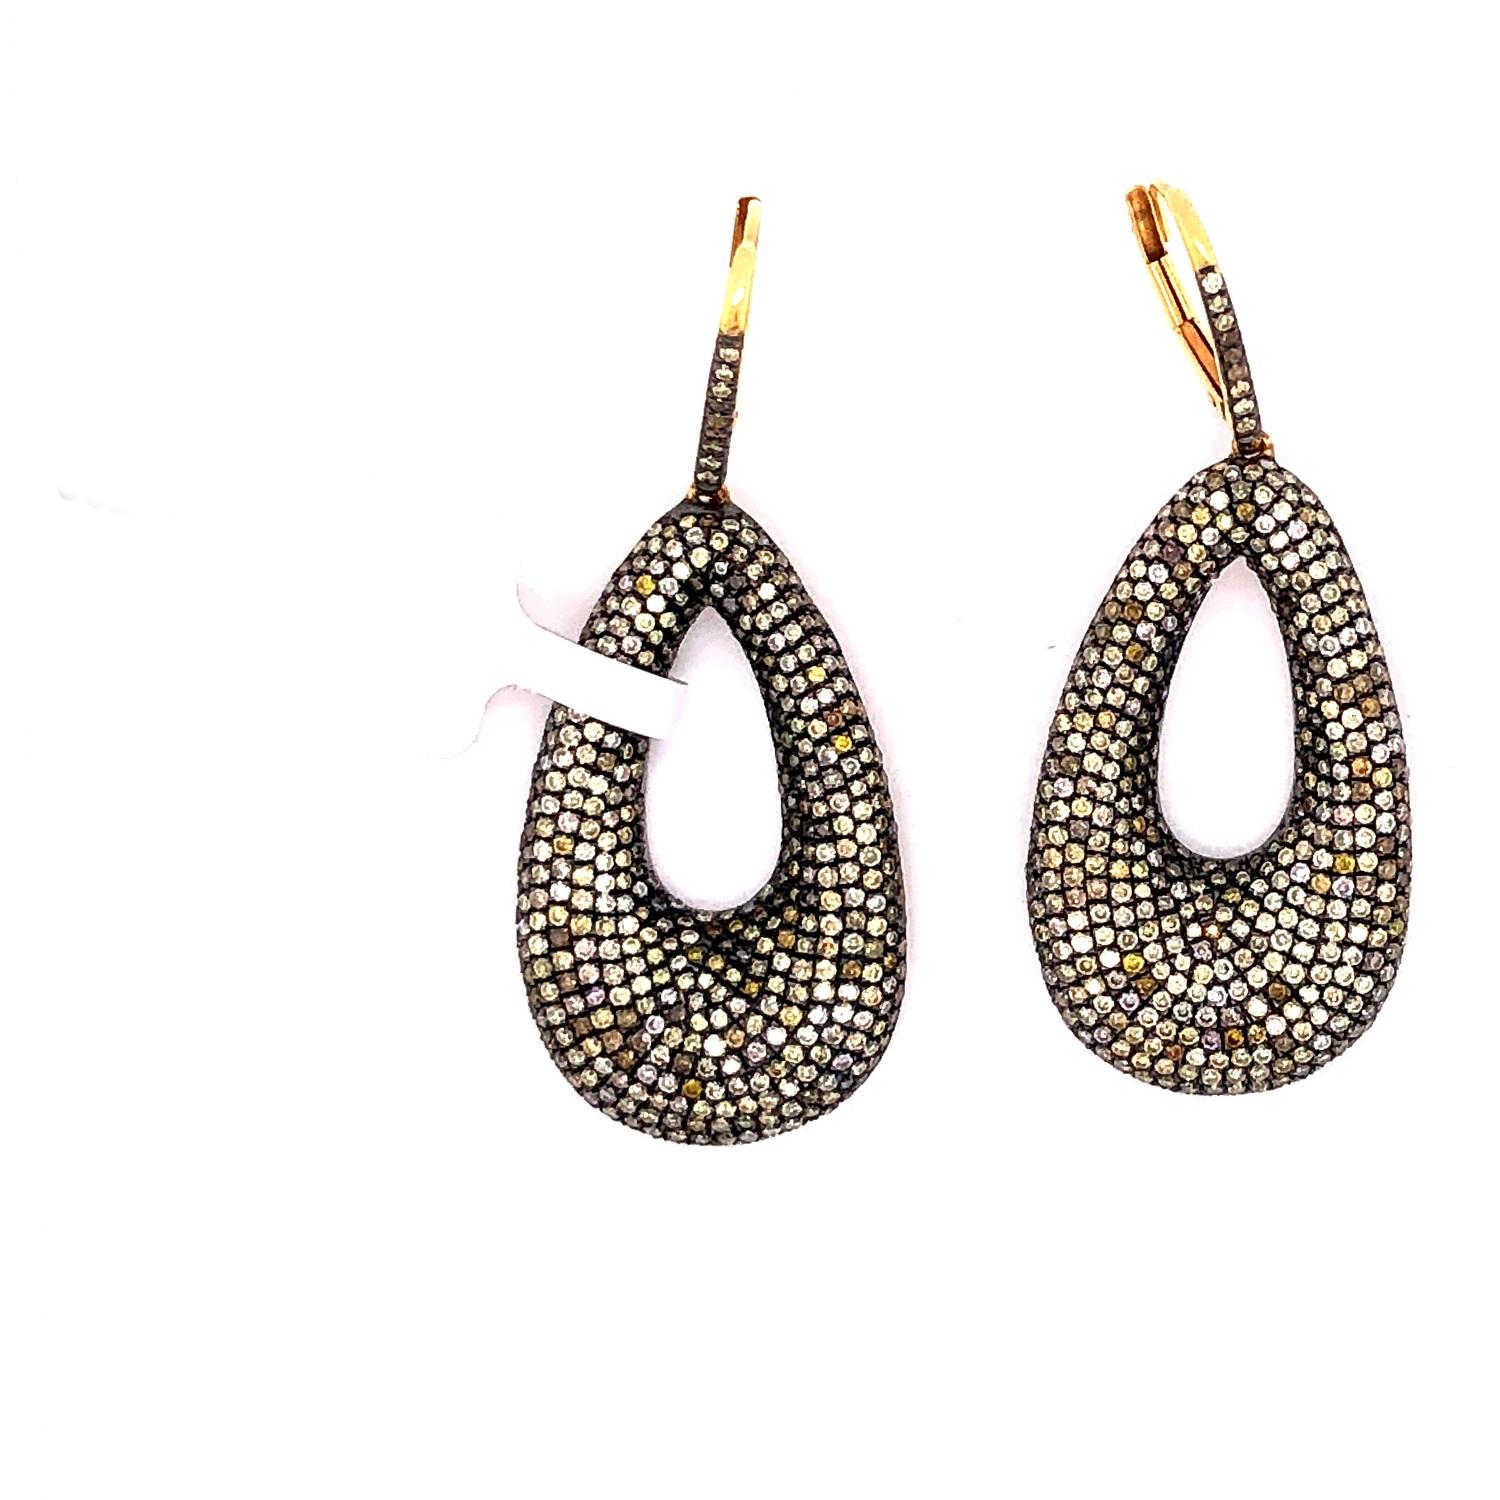 Mixed Cut Pear Shaped Dangle Earrings Accented With Pave Diamonds In 18k Gold & Silver For Sale